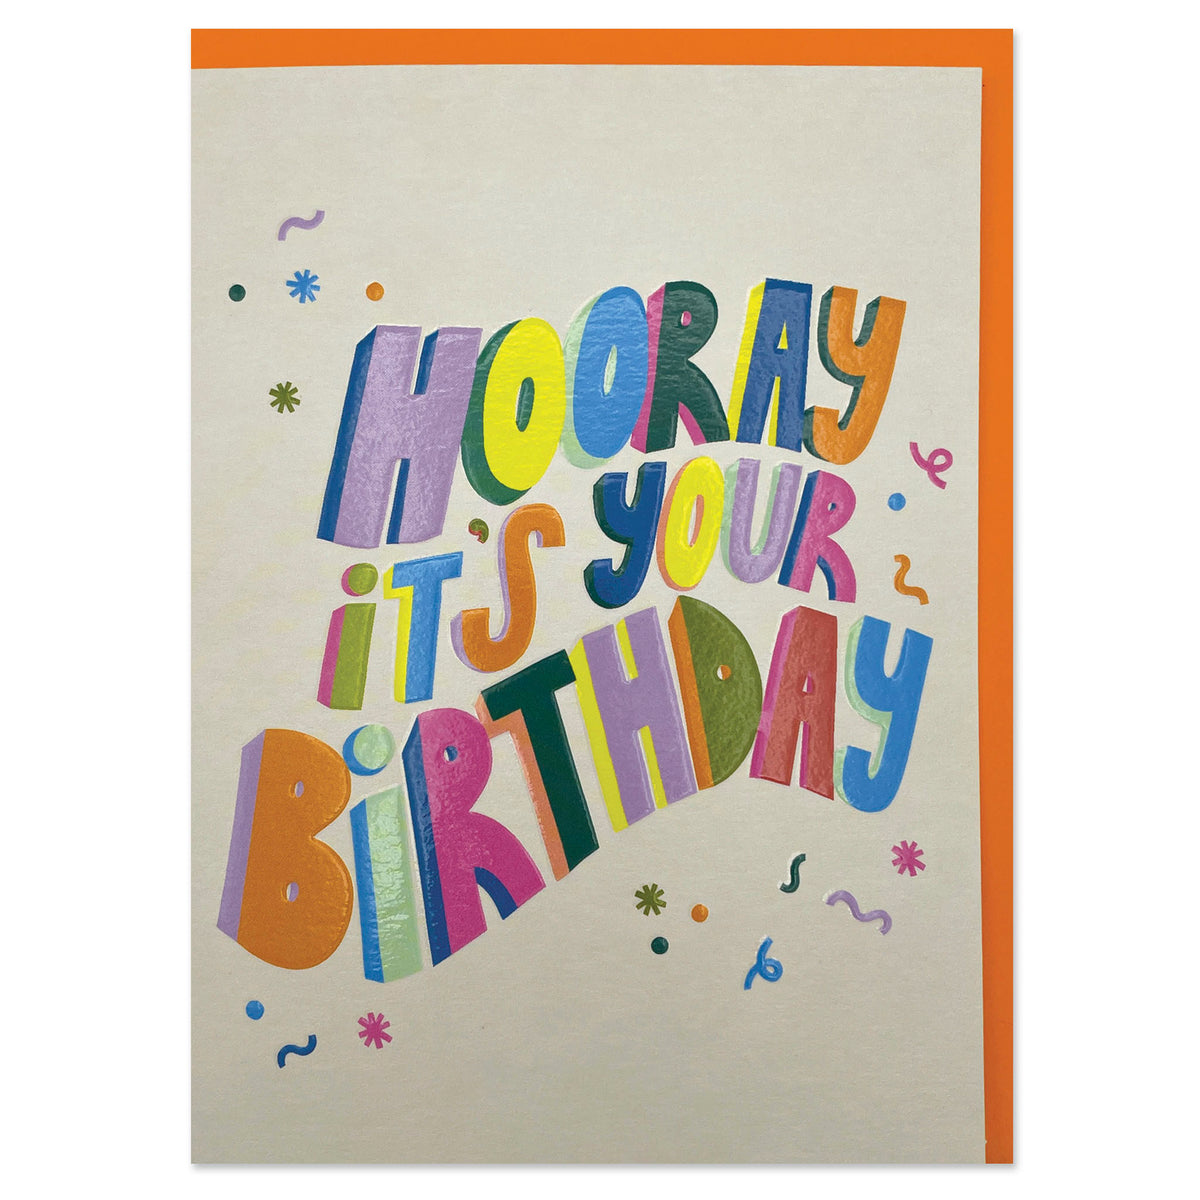 A cream coloured greetings card for a birthday, with a bright orange envelope. It has big wavy colourful words across the front saying in 3D capital letters &#39;hooray it&#39;s your birthday&#39;. There is some confetti flying around the words too.